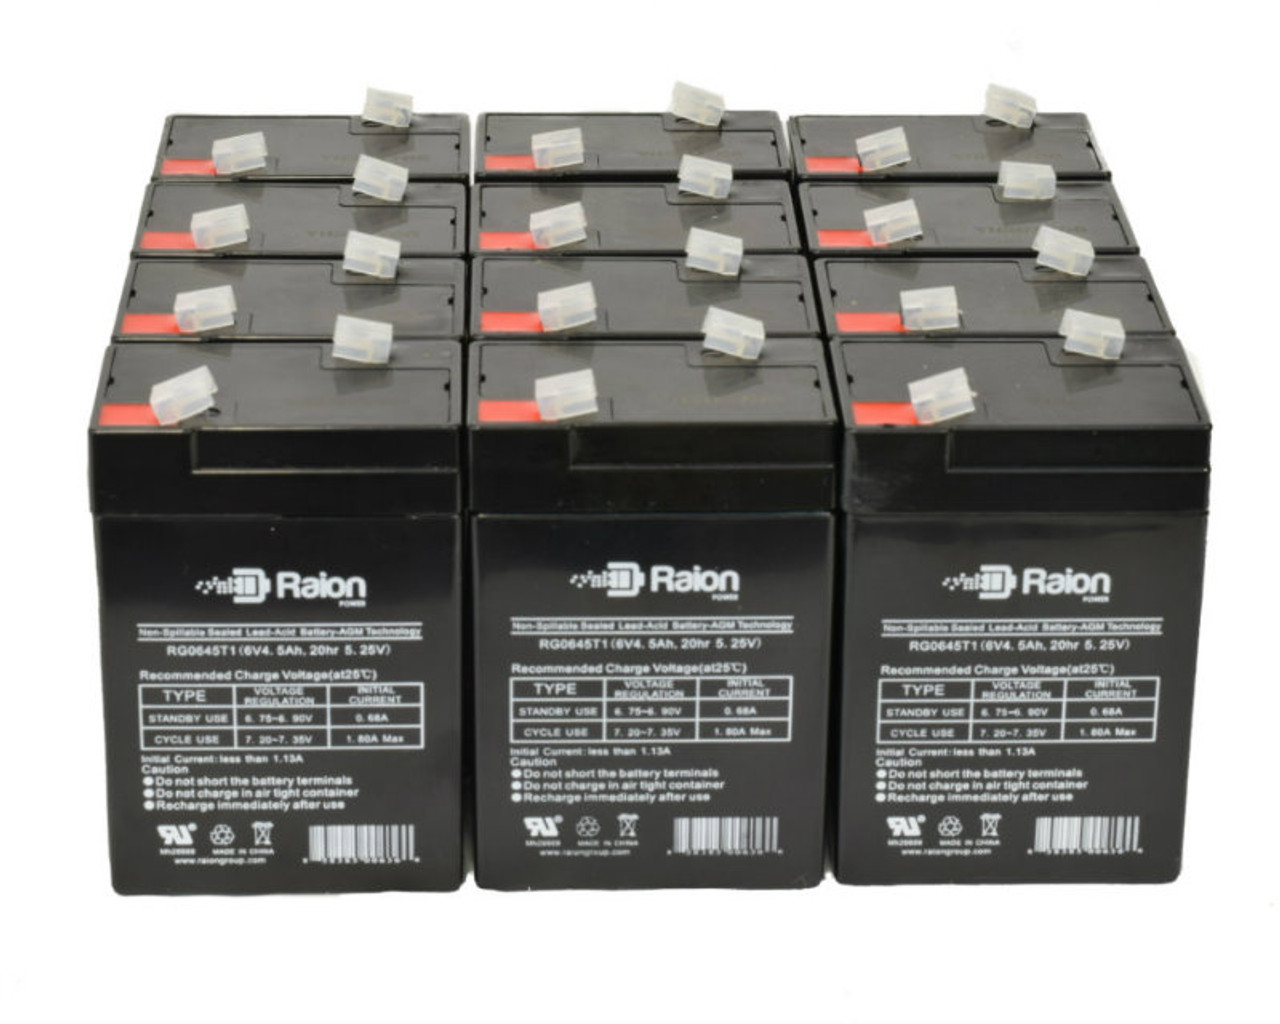 Raion Power 6 Volt 4.5Ah RG0645T1 Replacement Battery for Kweight Power KW 6-4.5 - 12 Pack